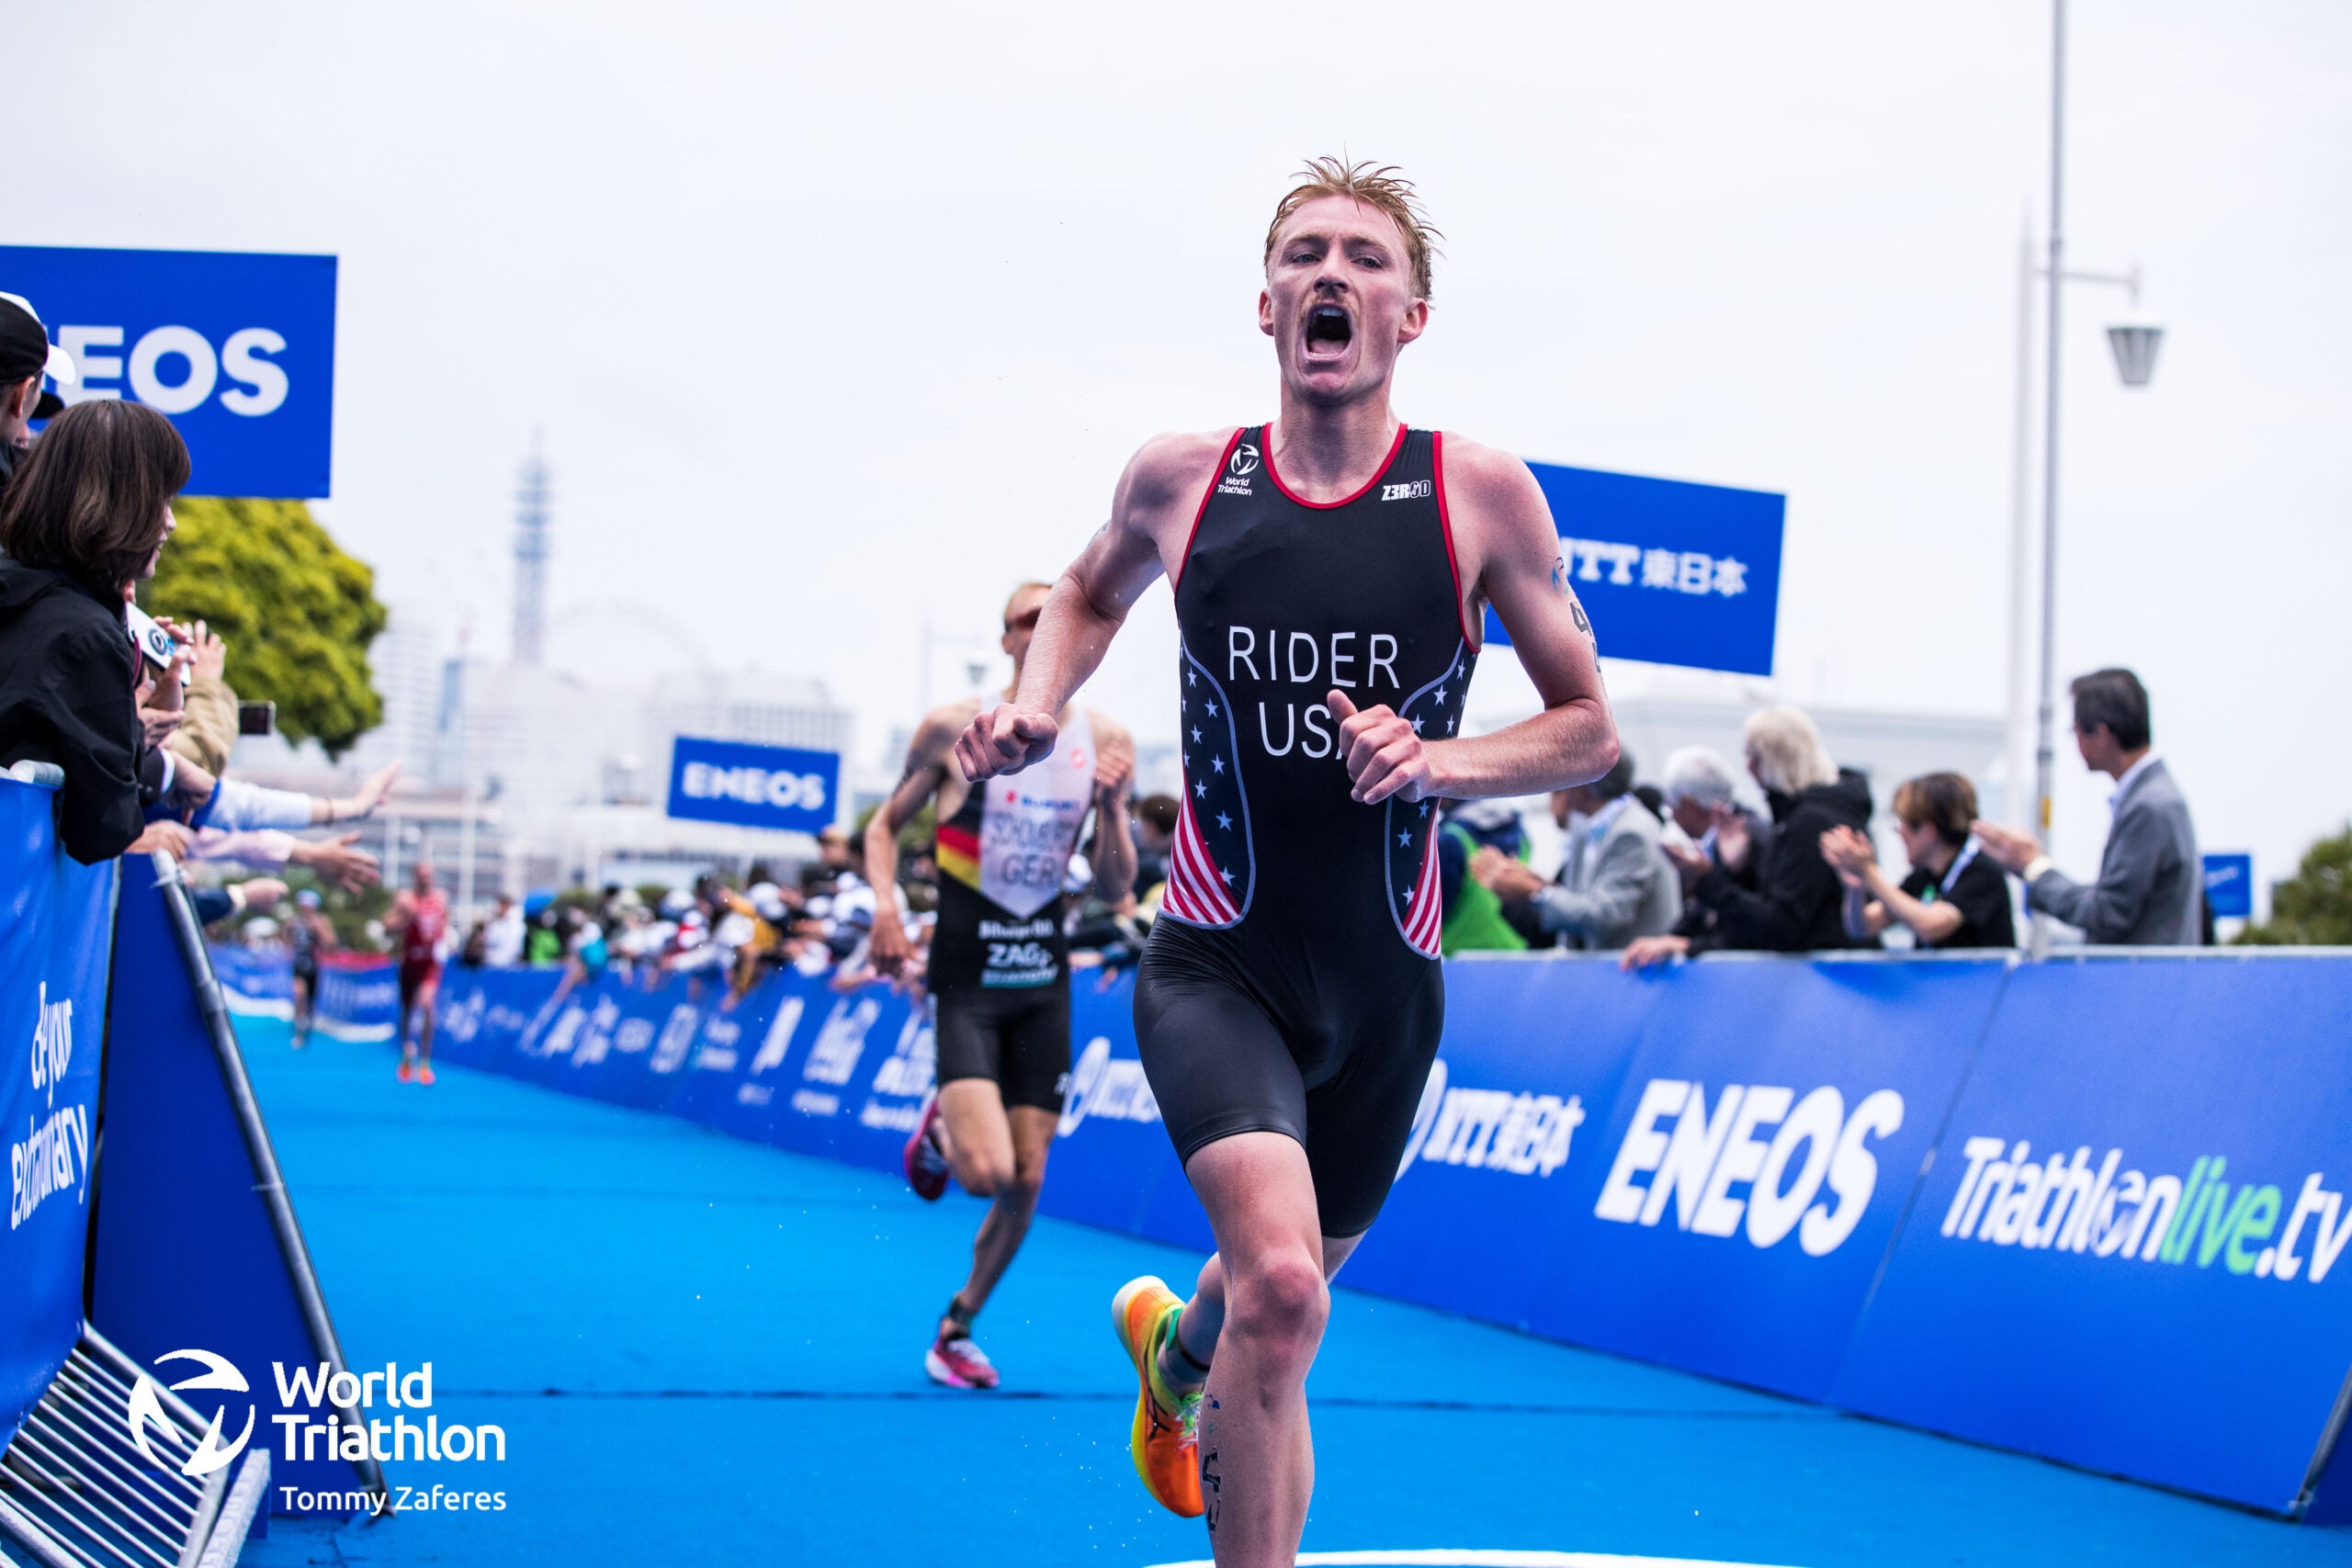 Seth Rider is a consistent performer and a reliable mixed relay athlete, having contributed to five World Triathlon Mixed Relay Series podiums for the U.S.